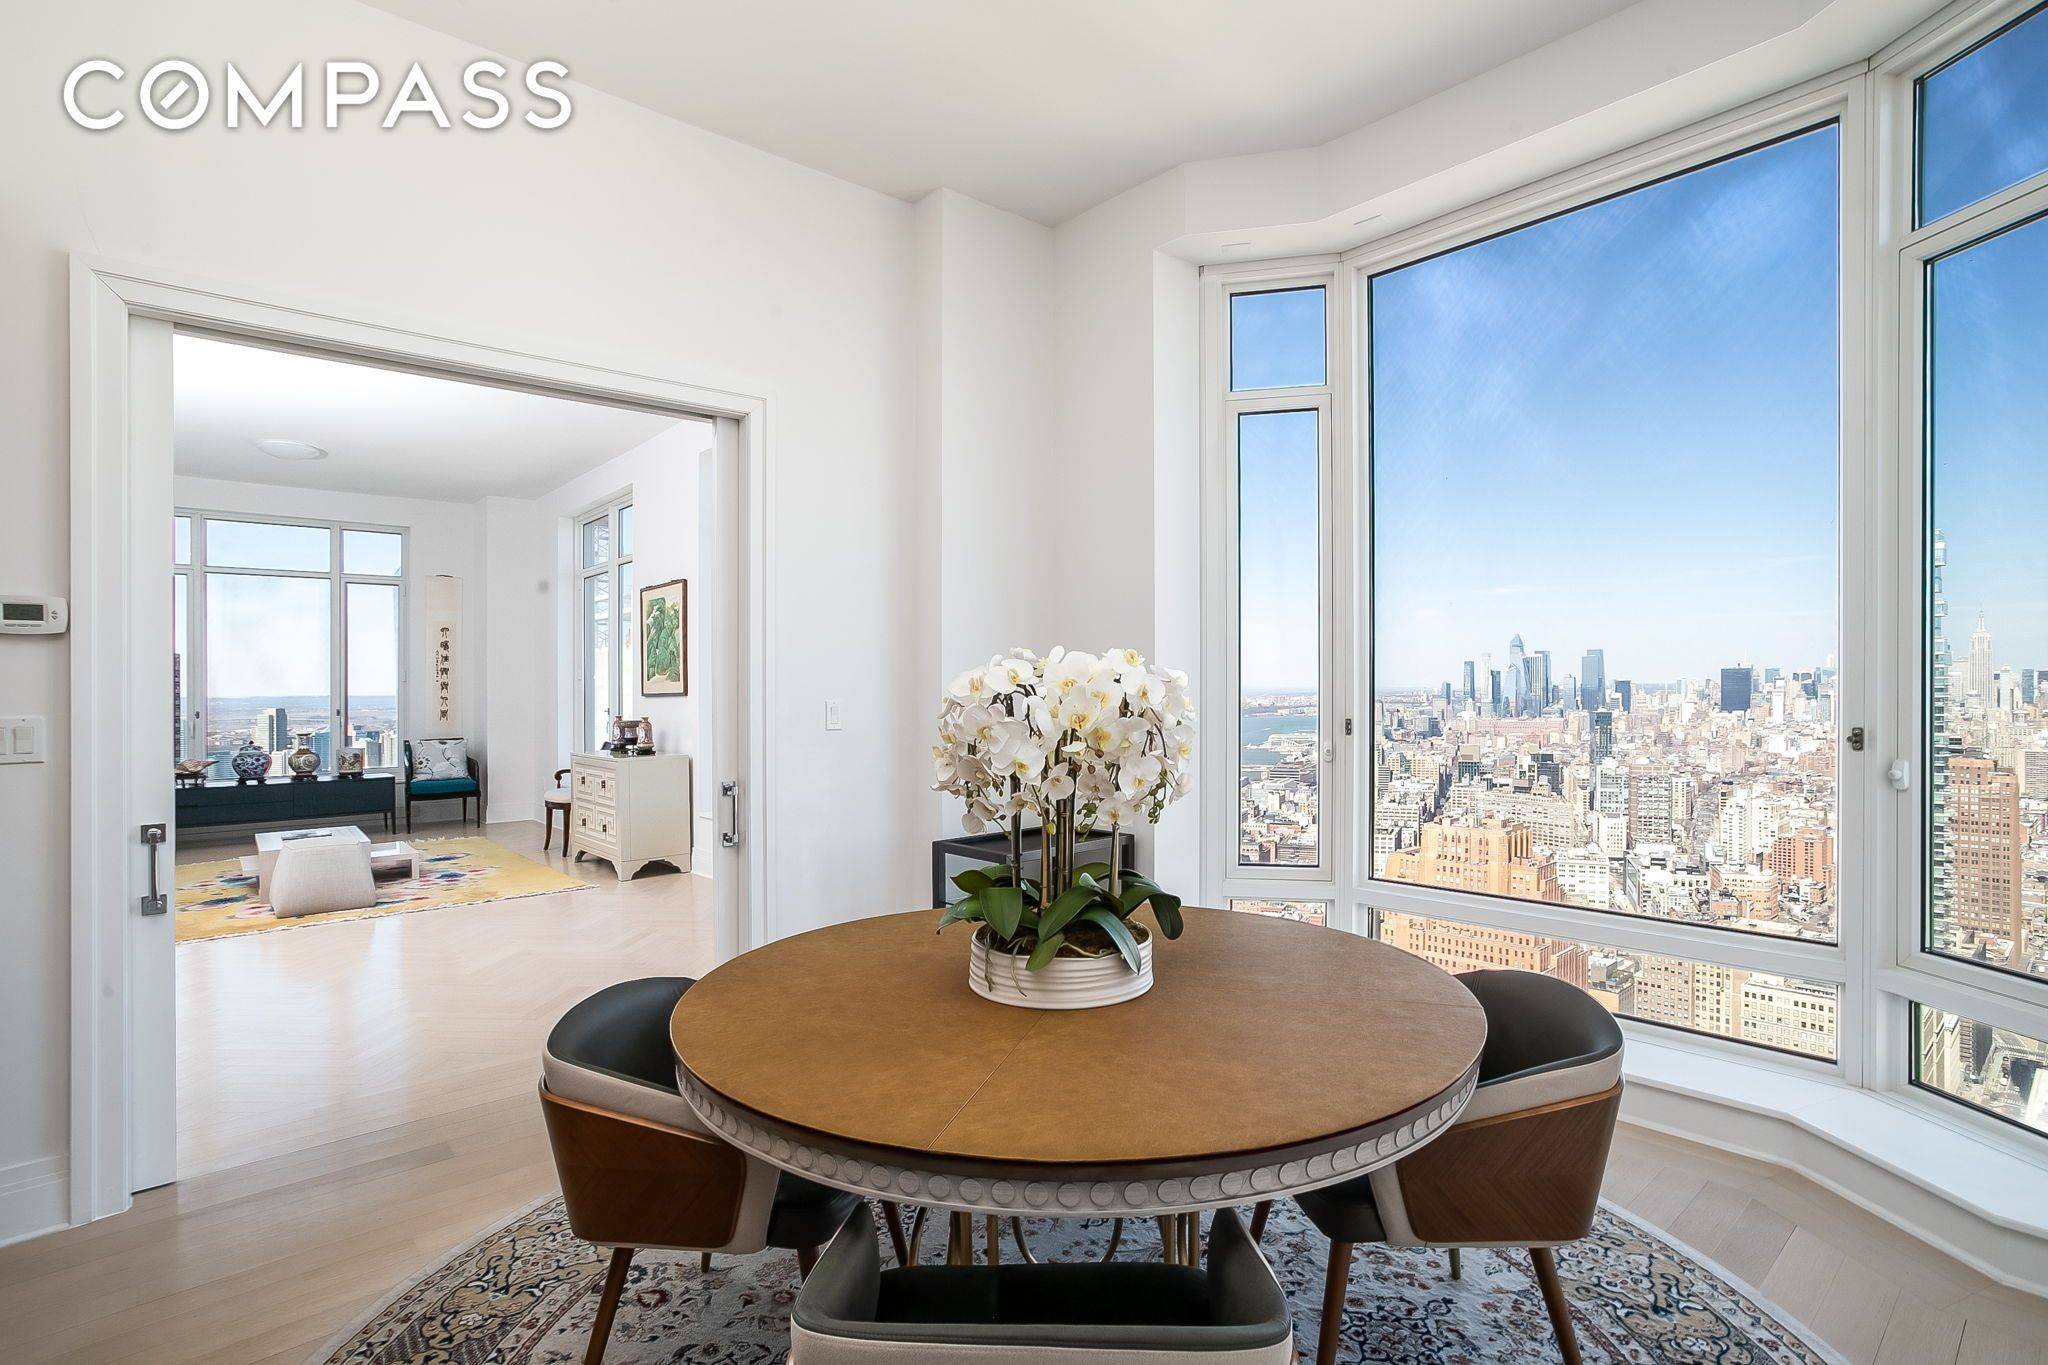 Perched on the northwest corner on the 61st floor with views of the Midtown skyline and the Hudson River, 61A is a stunning offering from the Four Seasons Private Residences.